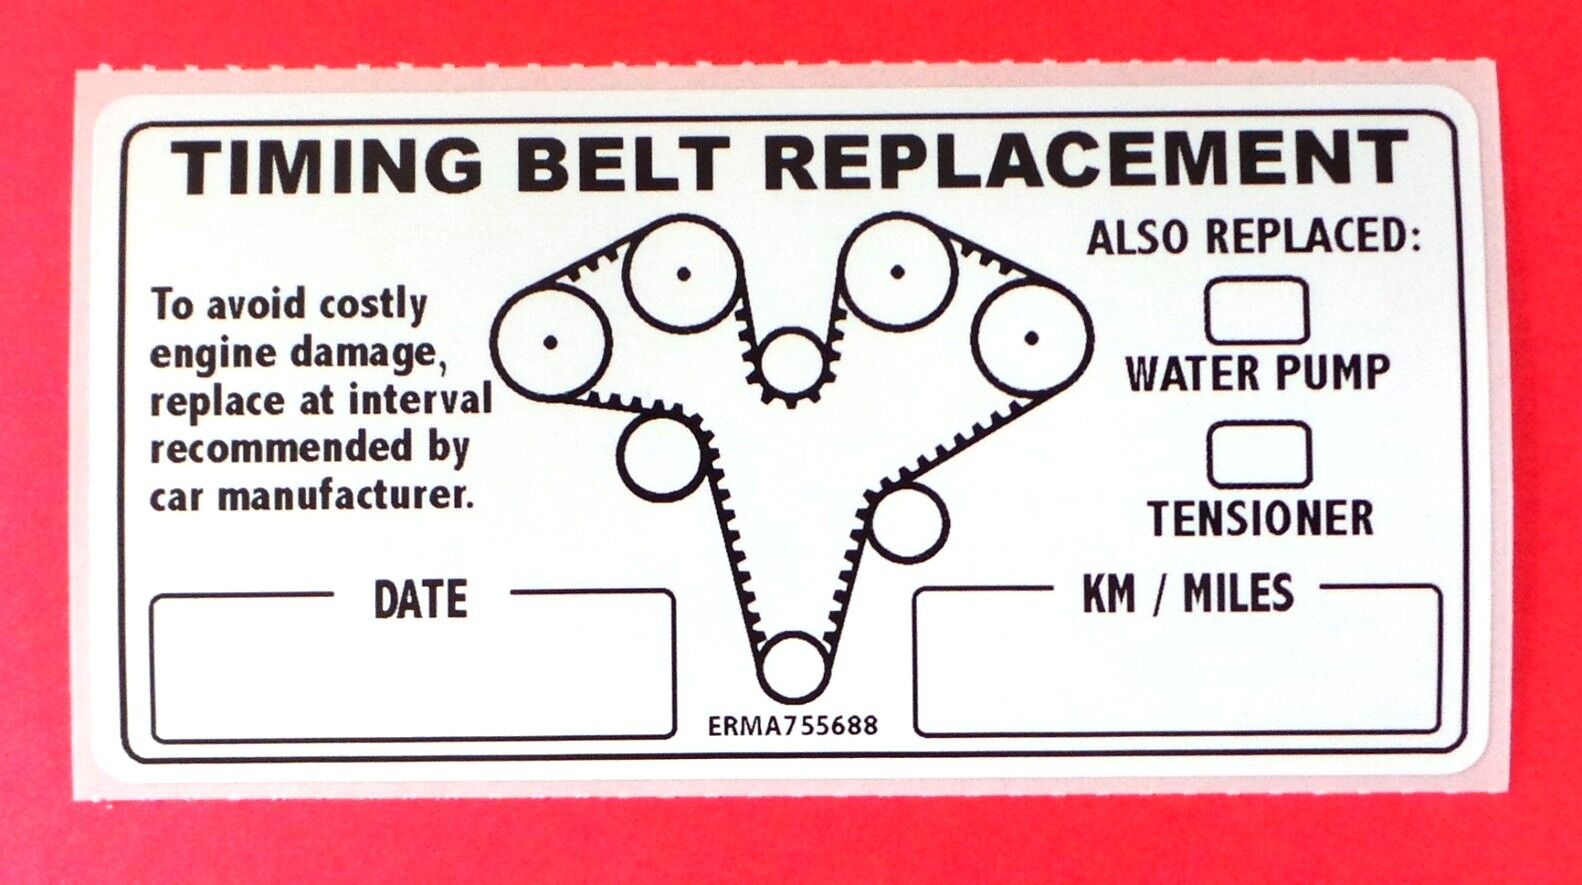 (Qty 12) CAM TIMING BELT WATER PUMP REPLACEMENT STICKER DECAL 4x2 ERMA755688